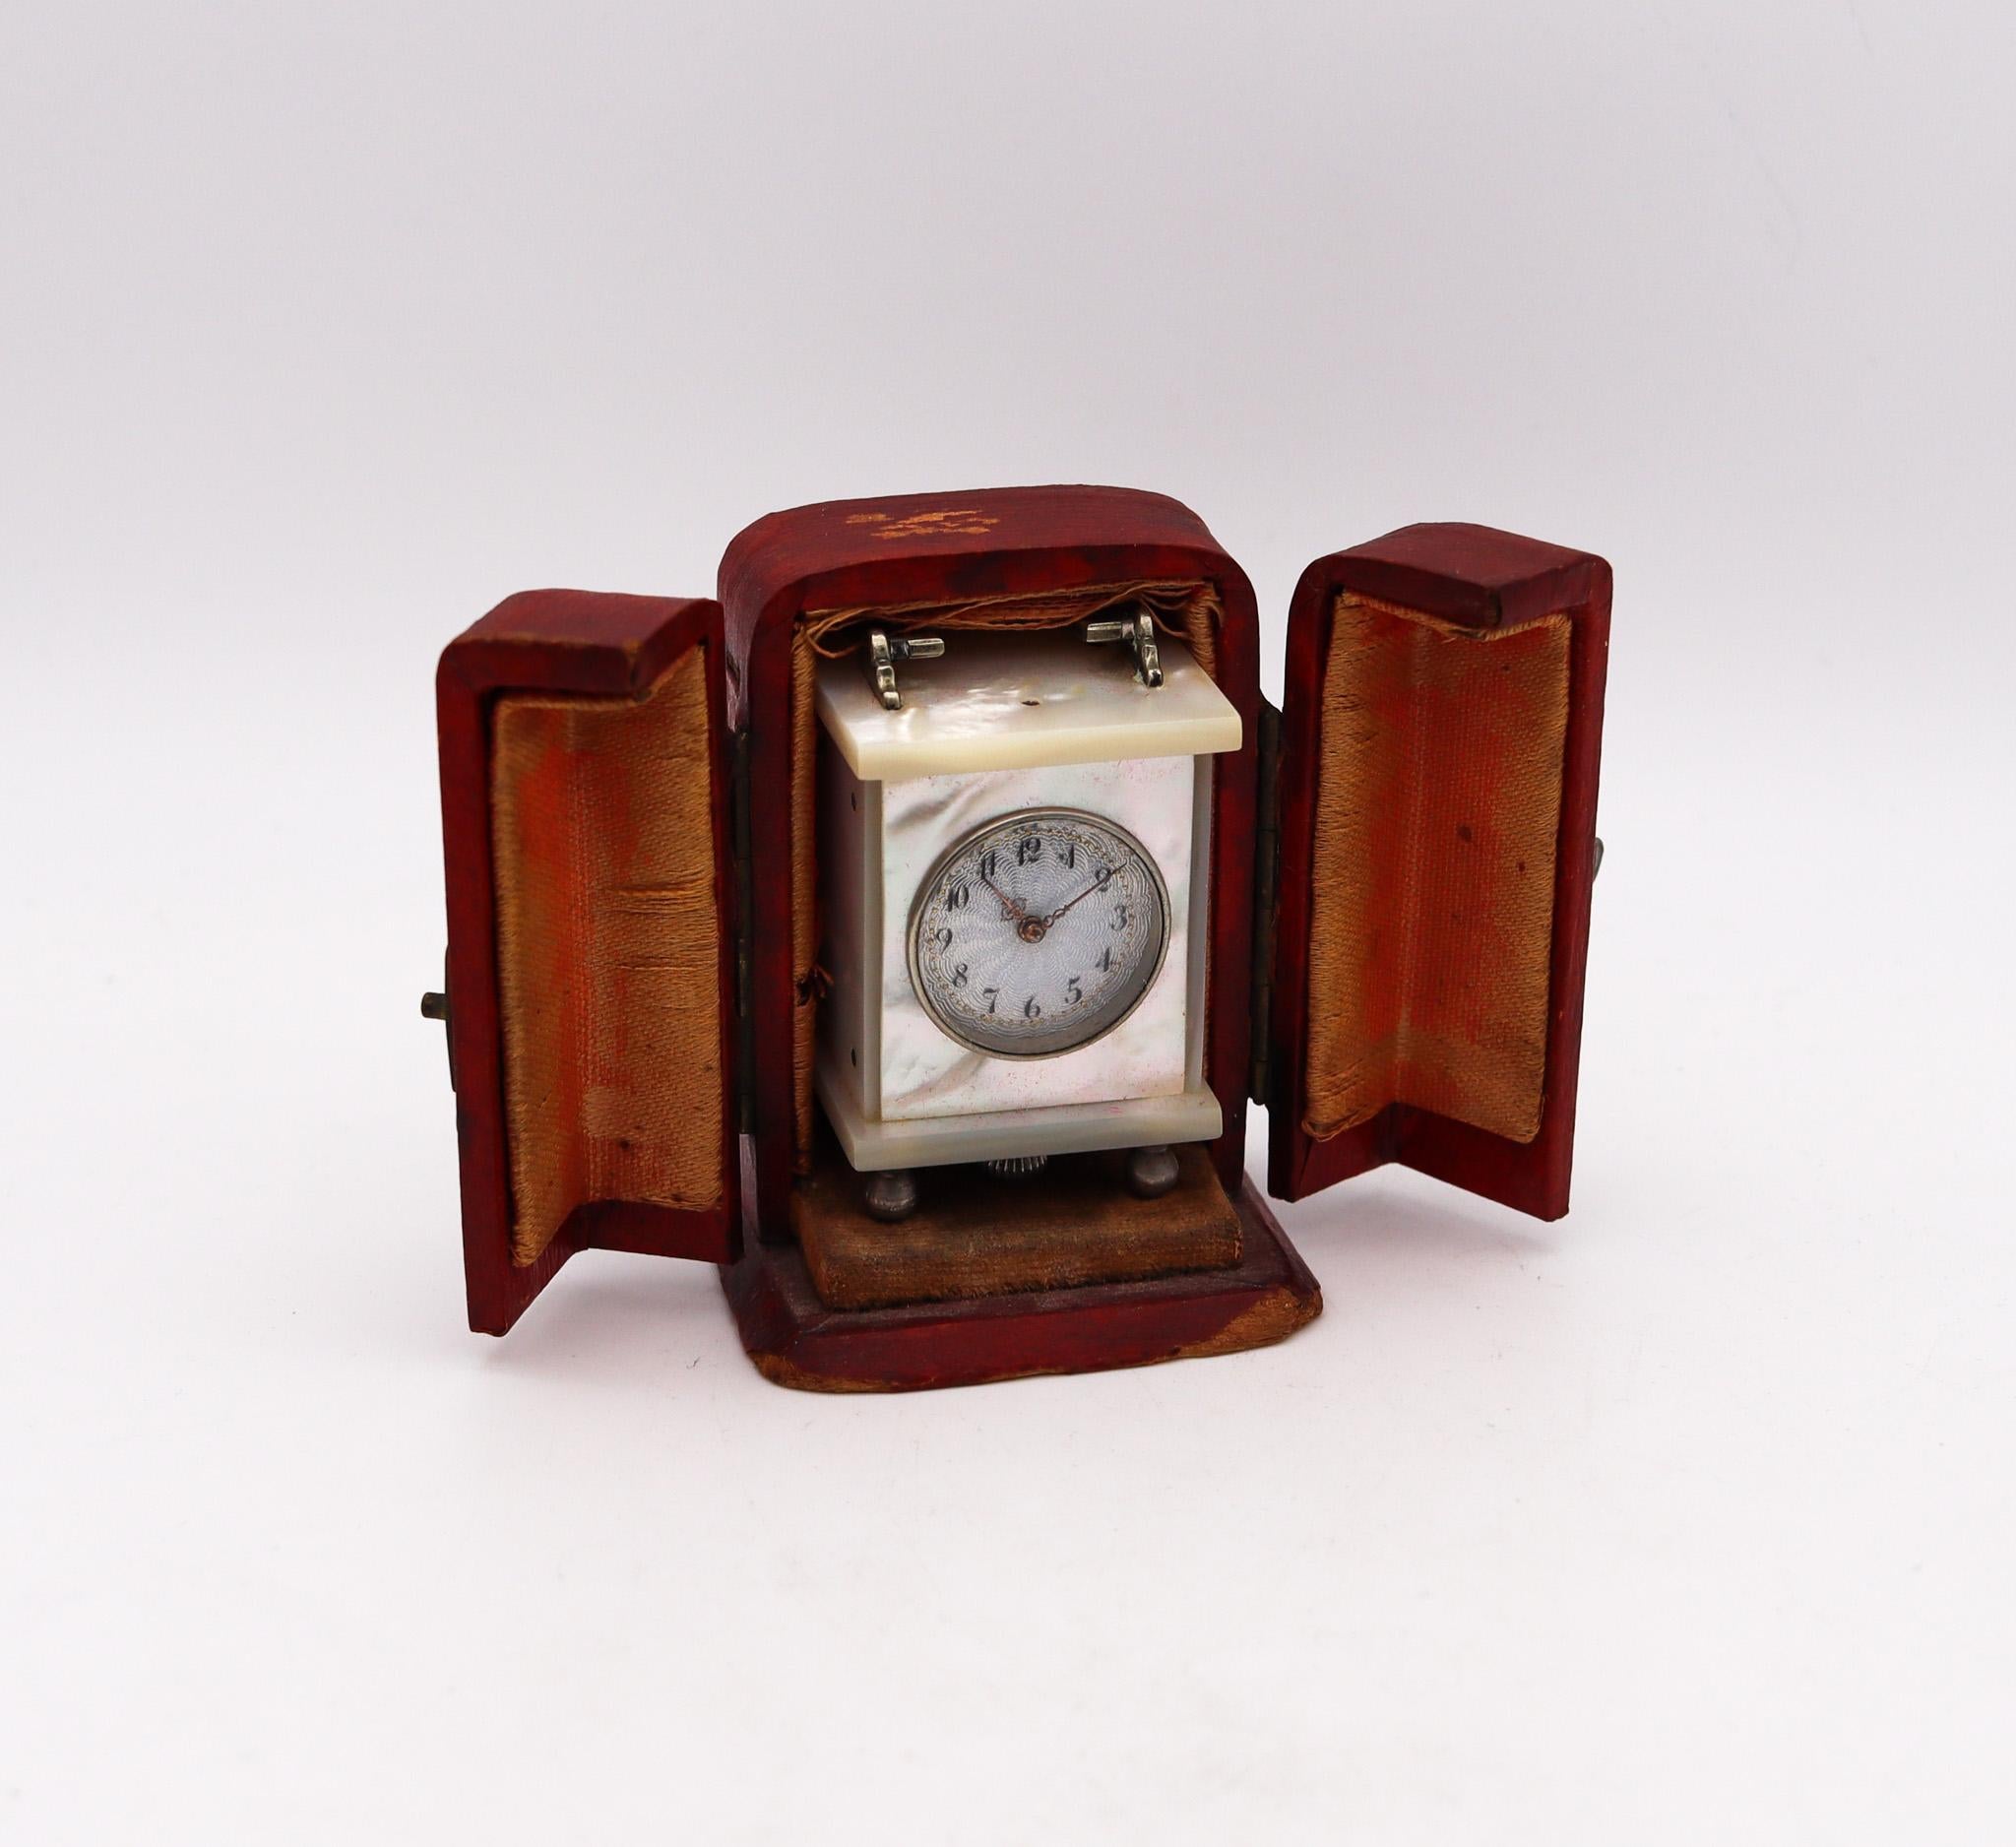 A miniature travel clock designed by Valmé.

Beautiful miniature travel-carriage clock, made in Geneva Switzerland. This rare little antique clock has been created during the art deco period, back in the 1920. It was crafted with gorgeous details